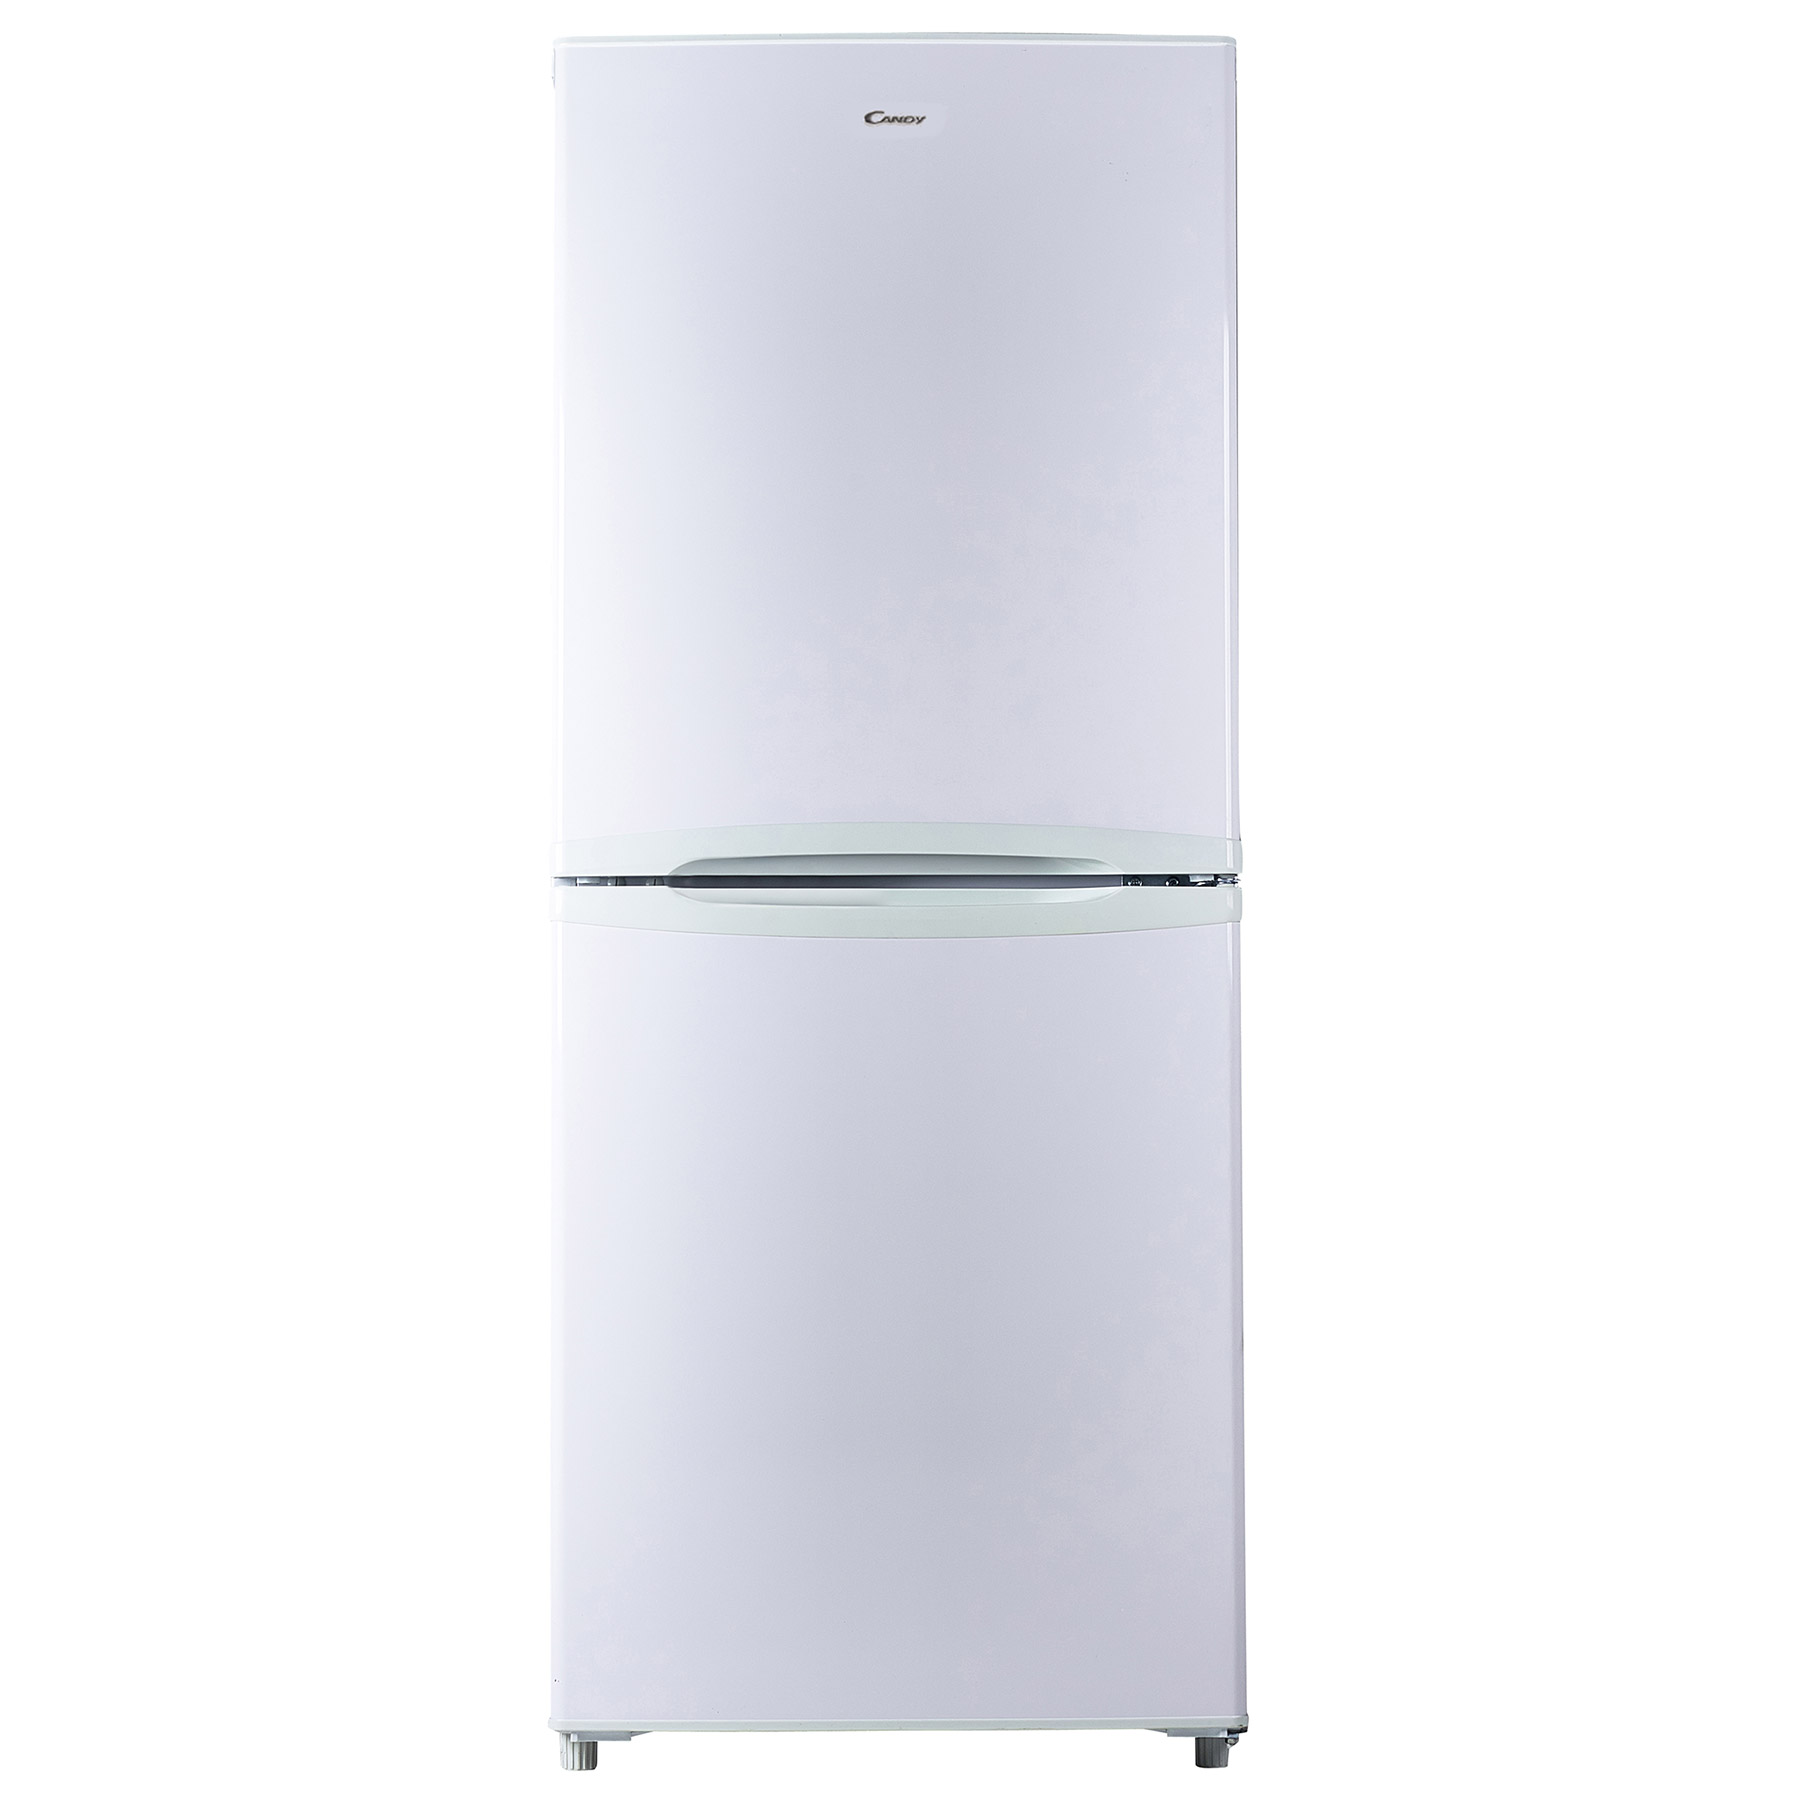 Image of Candy CSC135WEKN 55cm Fridge Freezer in White 1 36m F Rated 114 71L